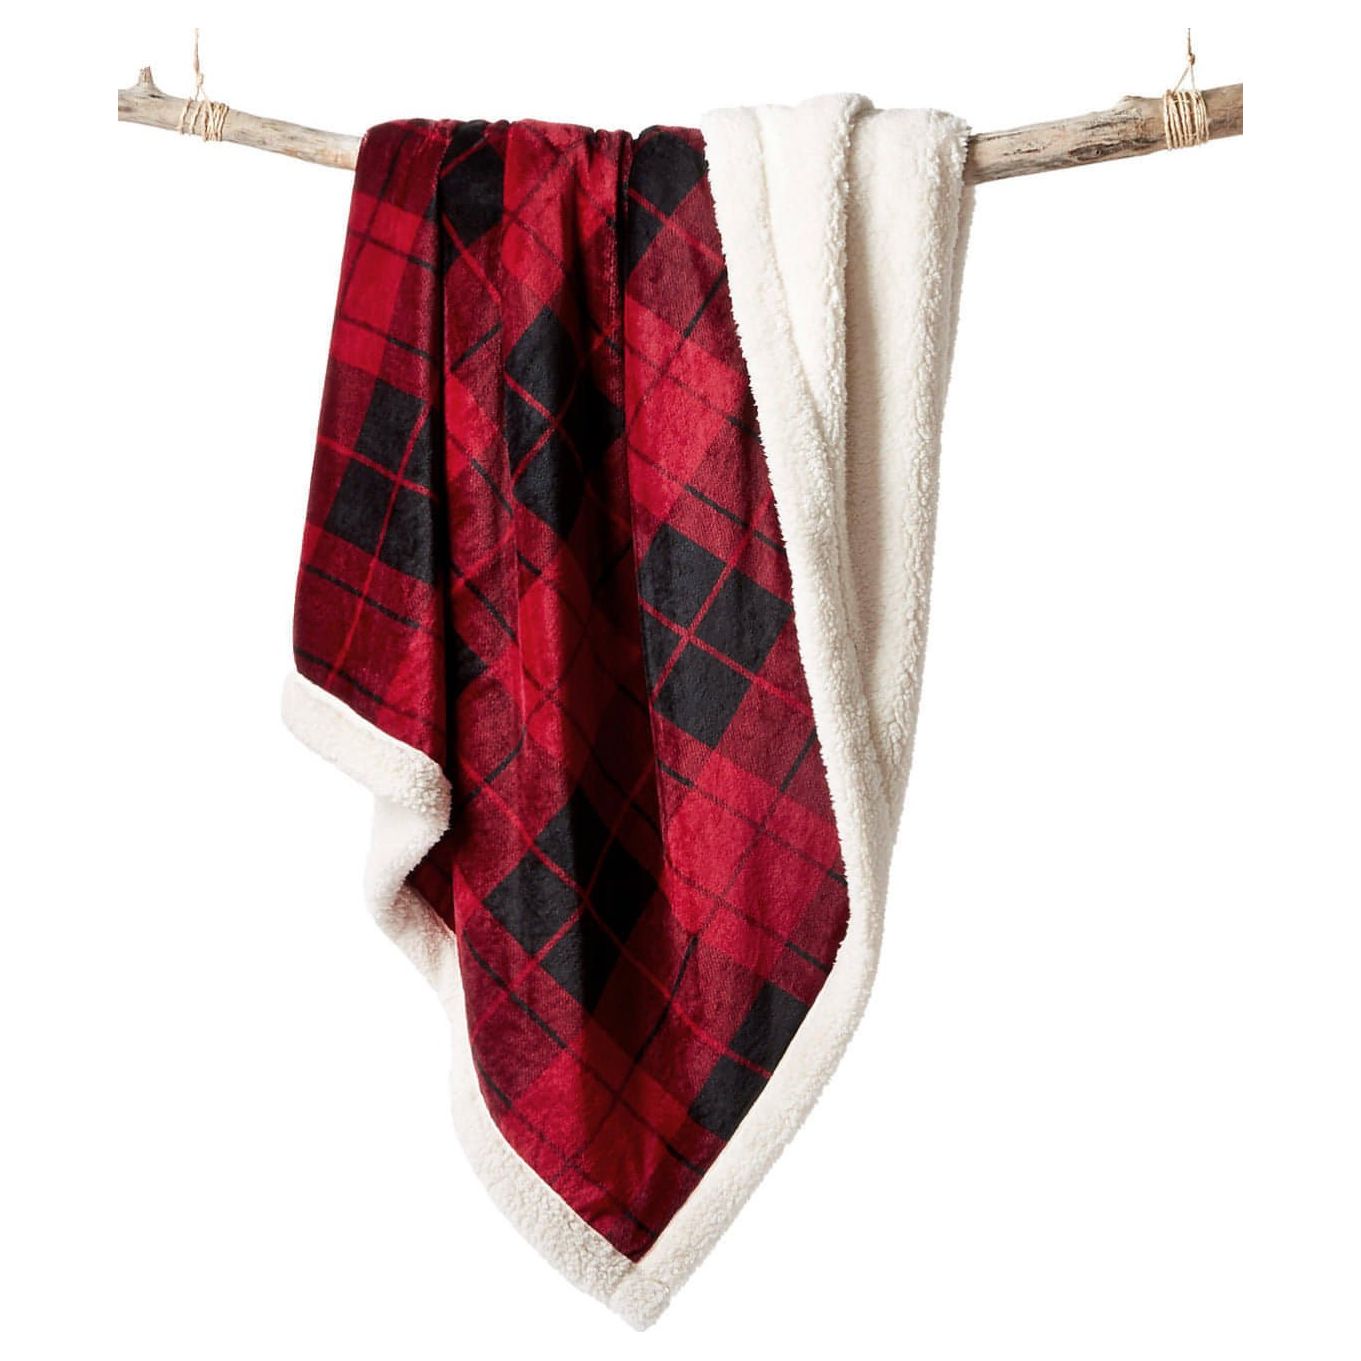 Martha Stewart Collection Plaid Reversible Classic Sherpa Throw, 50" x 60" (Red/Black) - Brandat OutletBuy Sherpa Throw Blanket | Martha Stewart Collection 